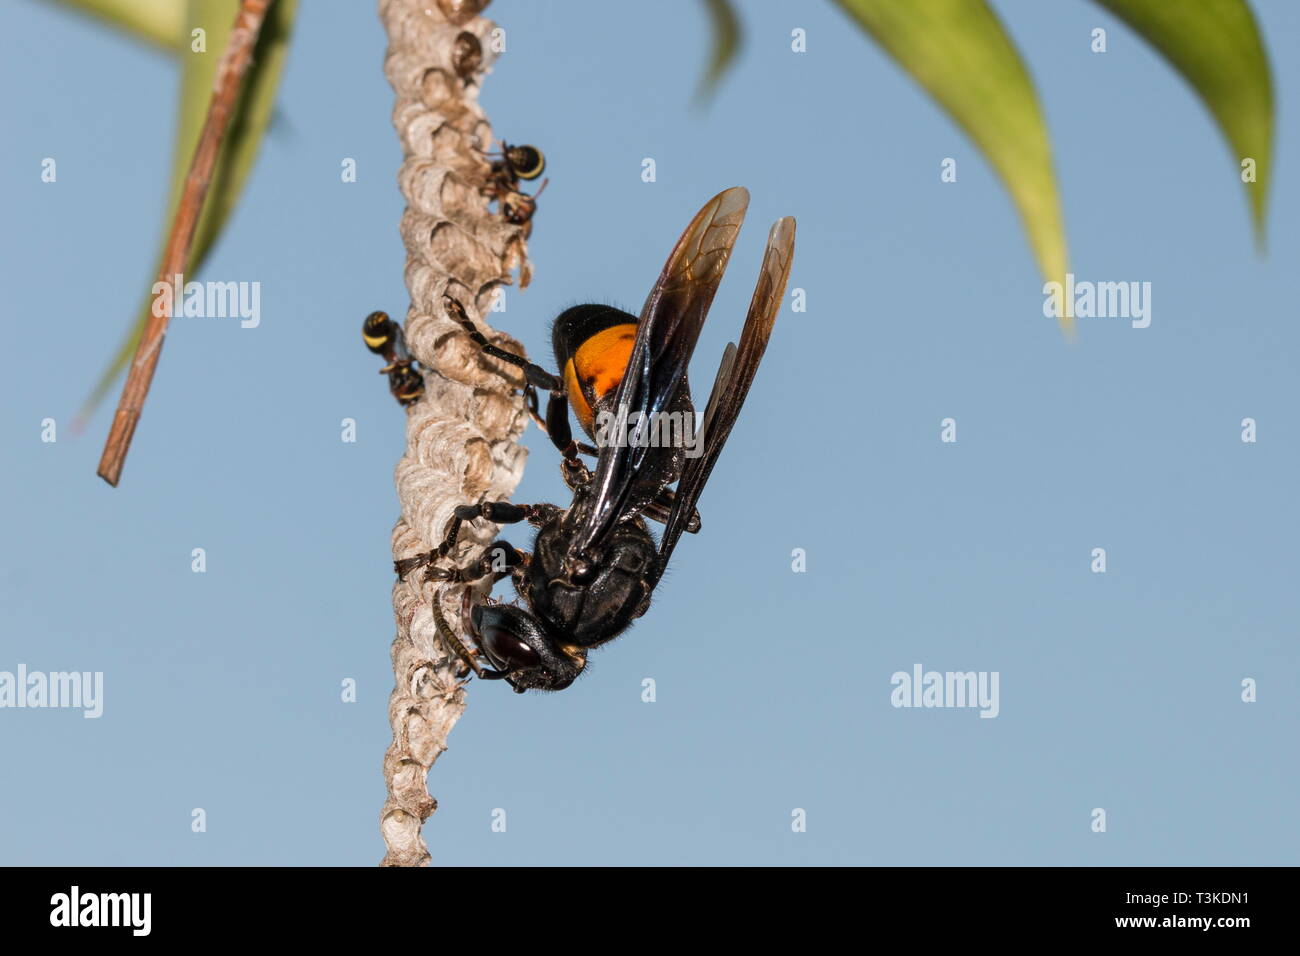 A banded hornet attacking the nest of the paper wasps and devouring its pupae while the paper wasps looked on helplessly. Stock Photo